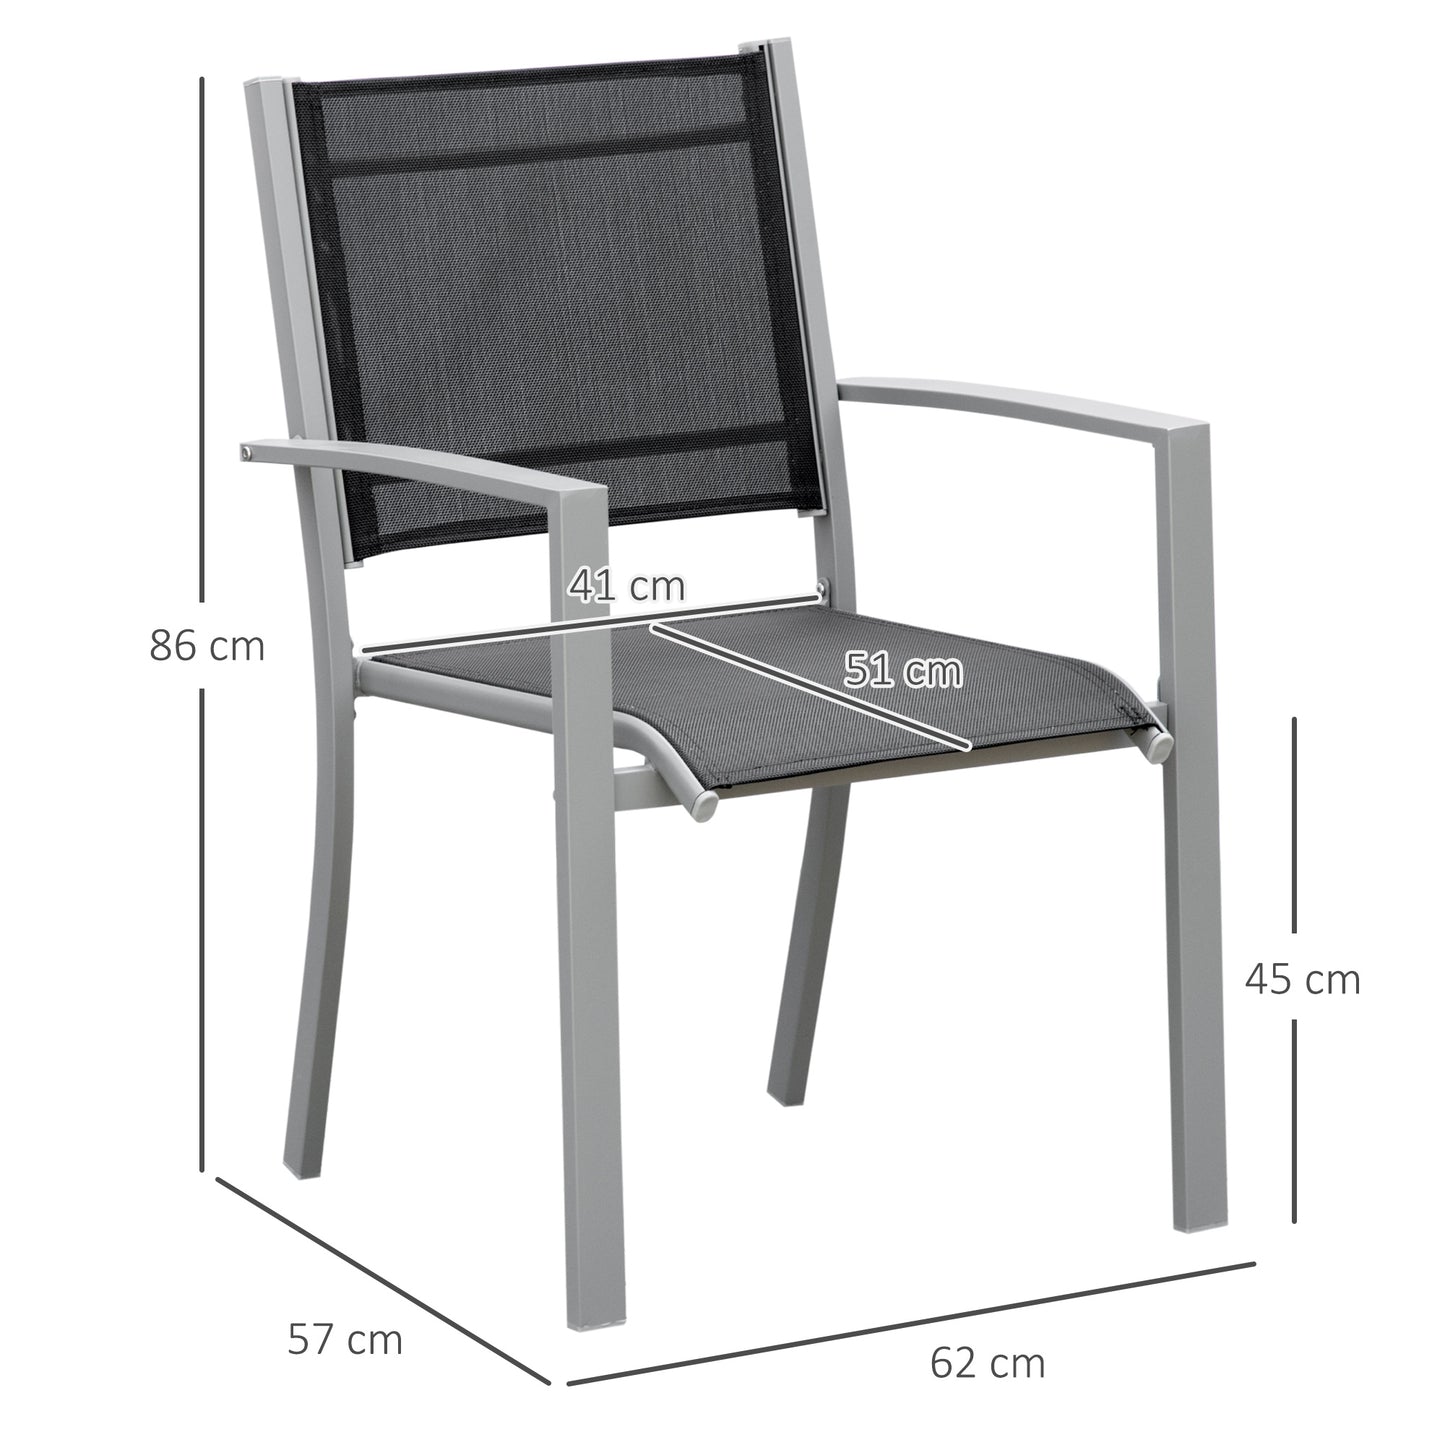 Outsunny Outdoor Chairs, Set of 2, Square Steel Frame, Texteline Seats, Foot Caps, Mesh, Boxy, Comfortable, Easy Clean, Black/Grey